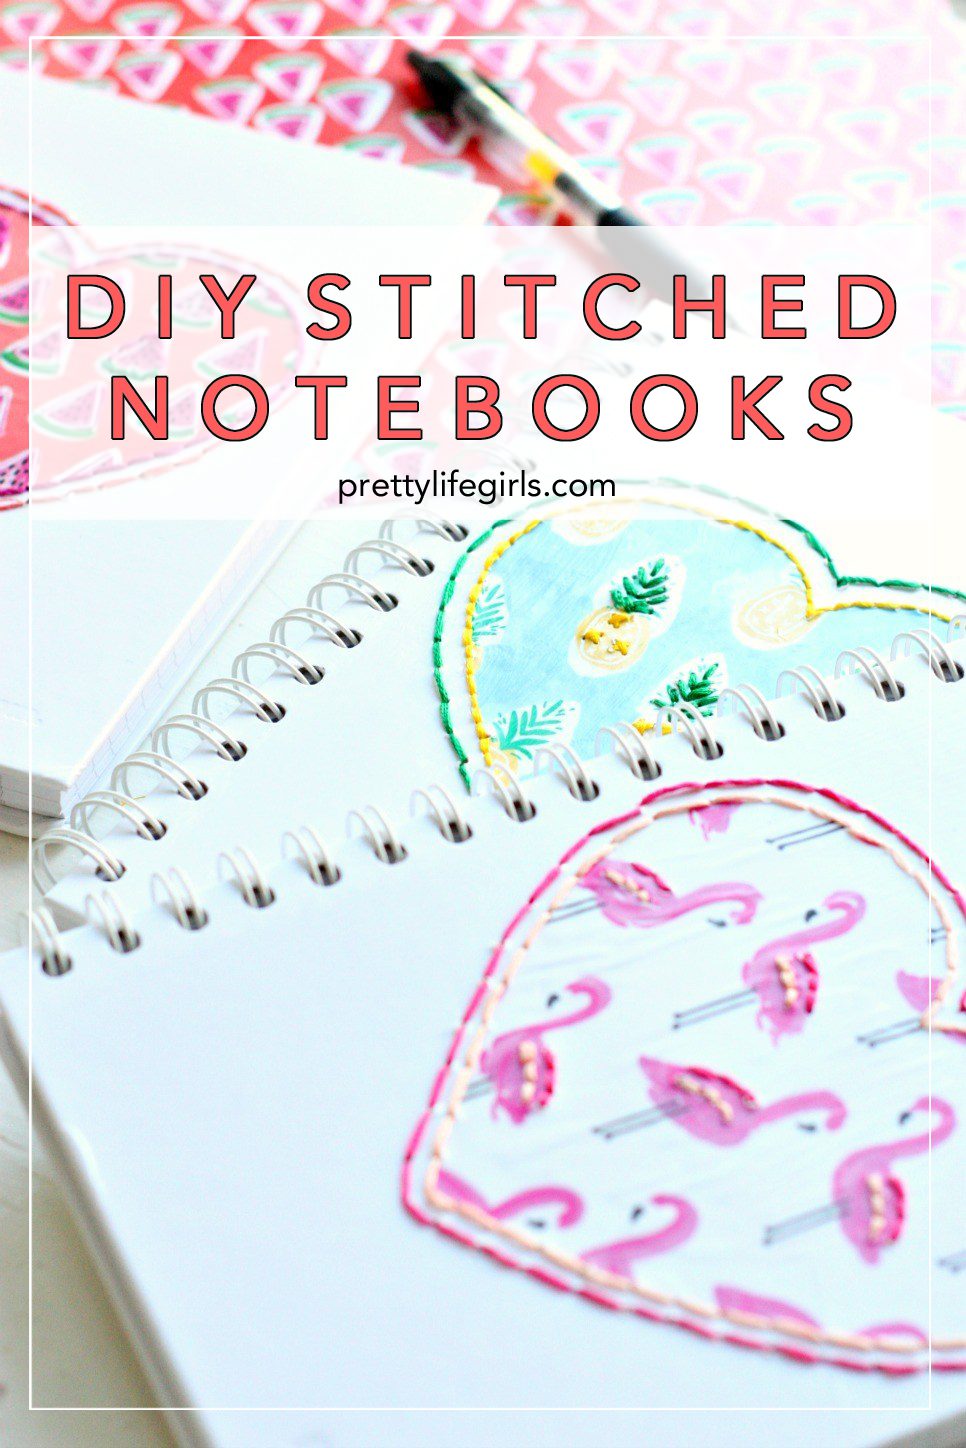 15 Lovely Handmade Valentine Gifts + featured by Top US Craft Blog + The Pretty Life Girls: + DIY Back-to-School Stitched Notebooks